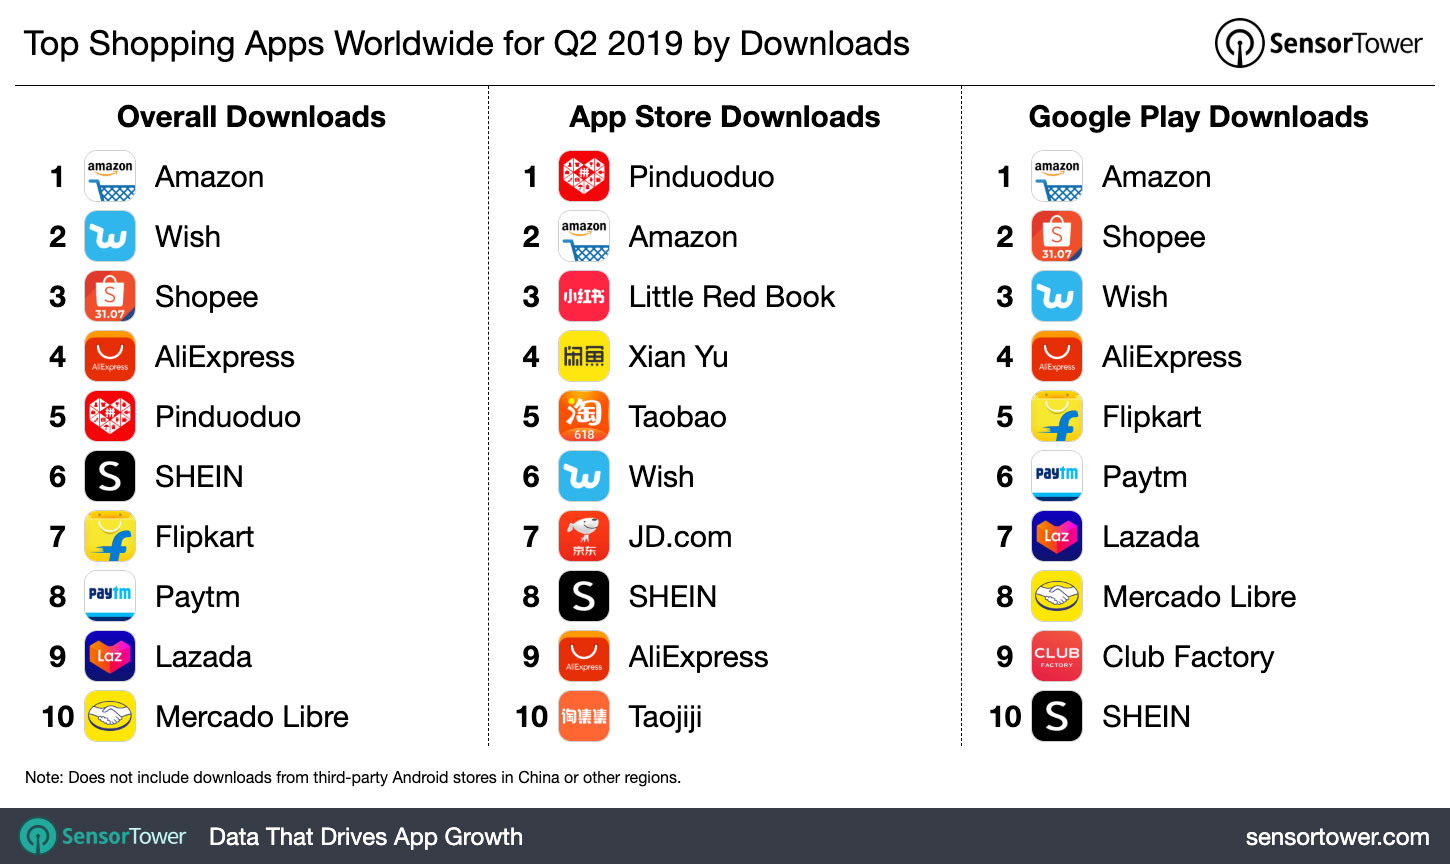 Top Shopping Apps Worldwide for Q2 2019 by Downloads